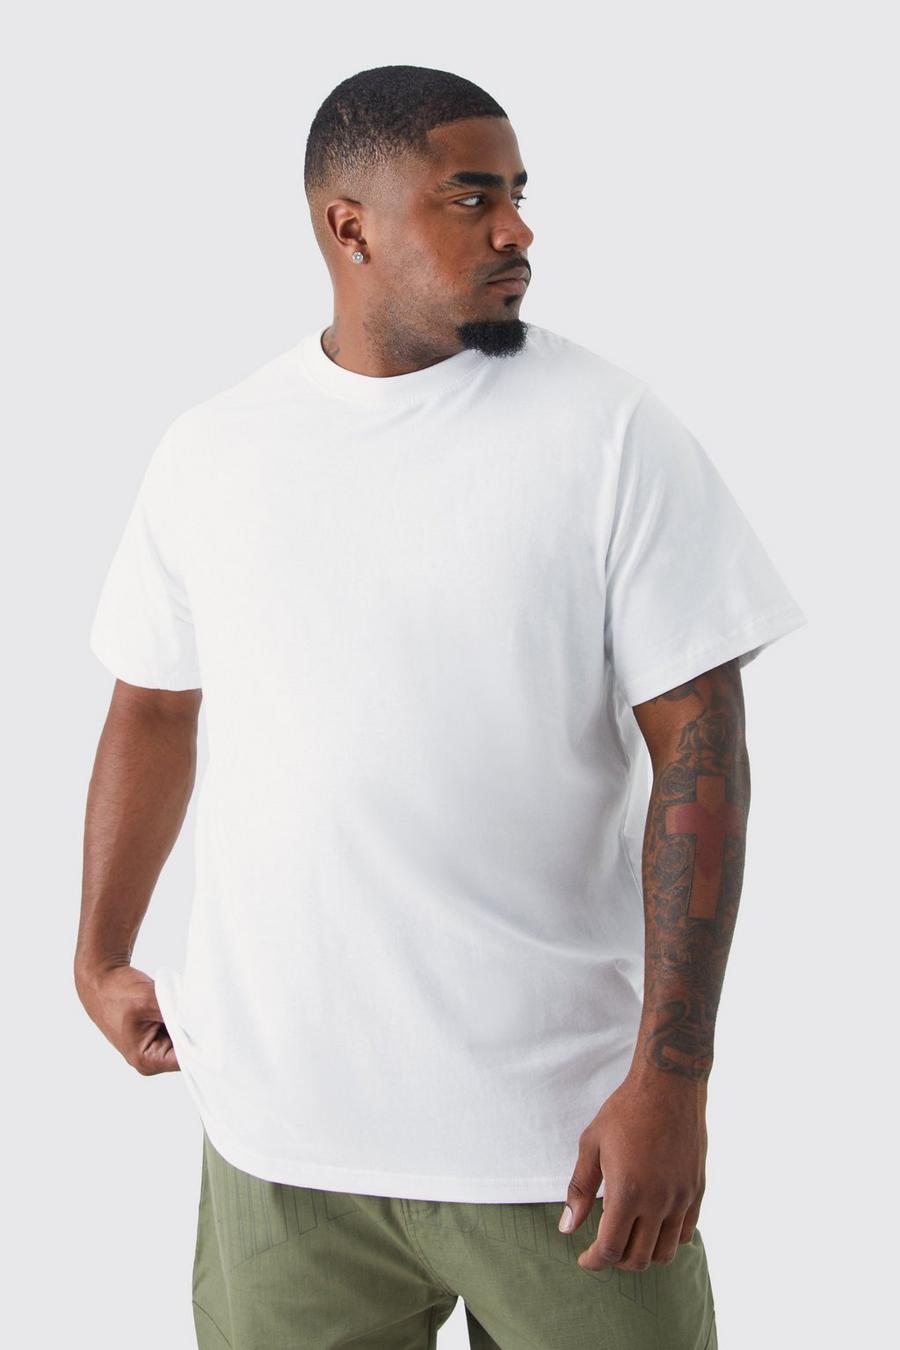 T-shirt Plus Size Slim Fit, White image number 1